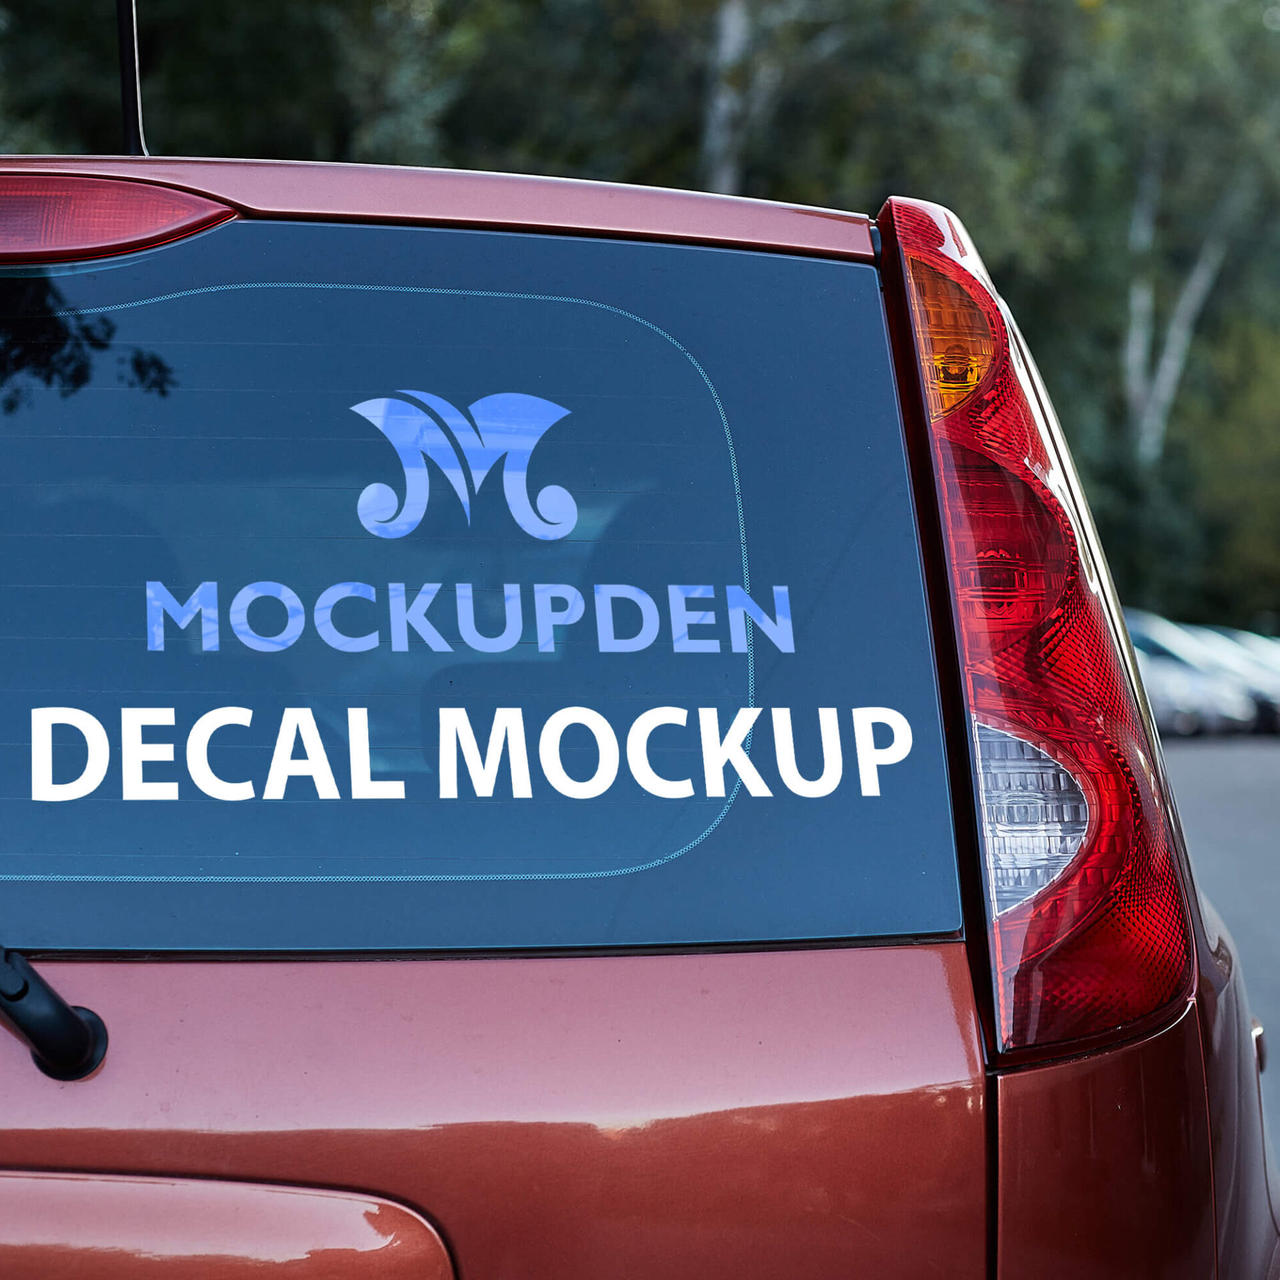 Download Free Car Decal Mockup Psd Template By Mockupden On Deviantart